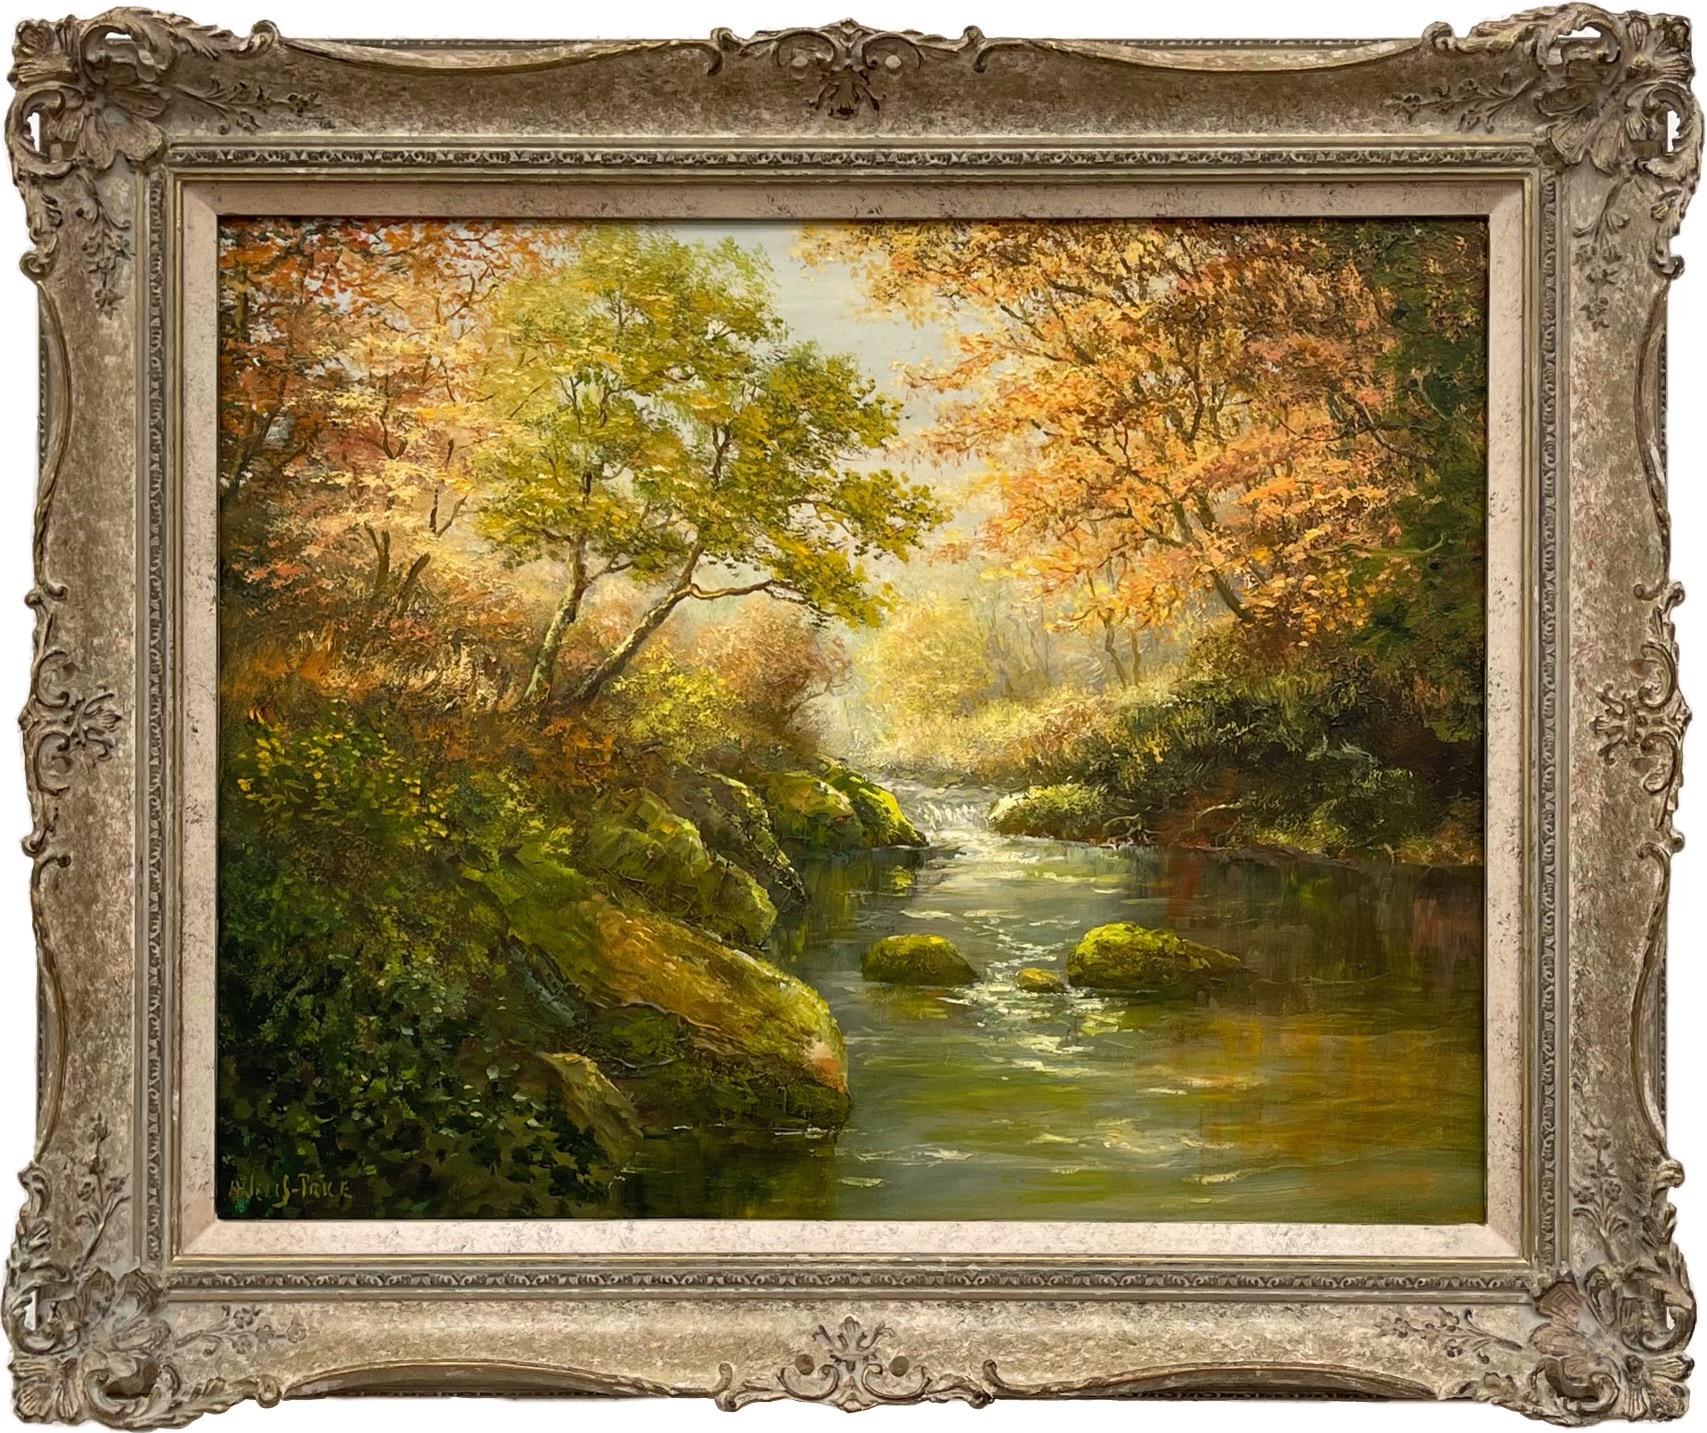 Albert Wells Price Landscape Painting - Oil Painting of Beautiful River Landscape Scene in Autumn Sun by British Artist